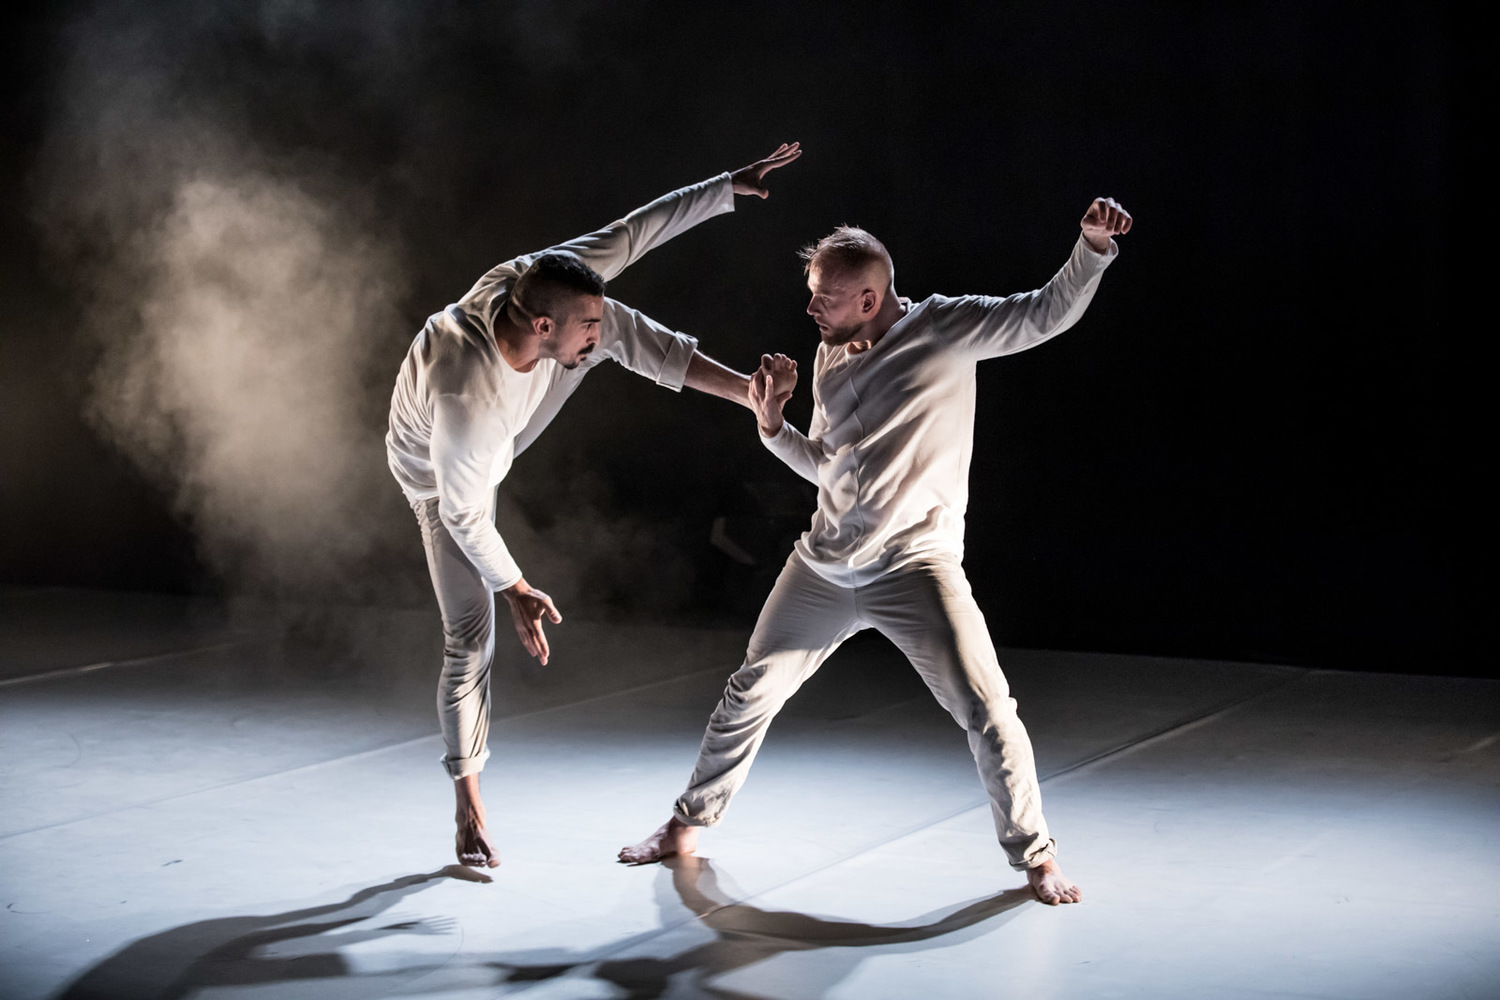 A FUSION OF CONTORTION, HIP-HOP, THREADING, BREAKDANCING AND CONTEMPORARY DANCE. Dance St. Louis kicks off its 53rd season with an arousing presentation of Wewolf, the LA-based company of award-winning international artists James Gregg and RubberLegz (aka Rauf Yasit). 5